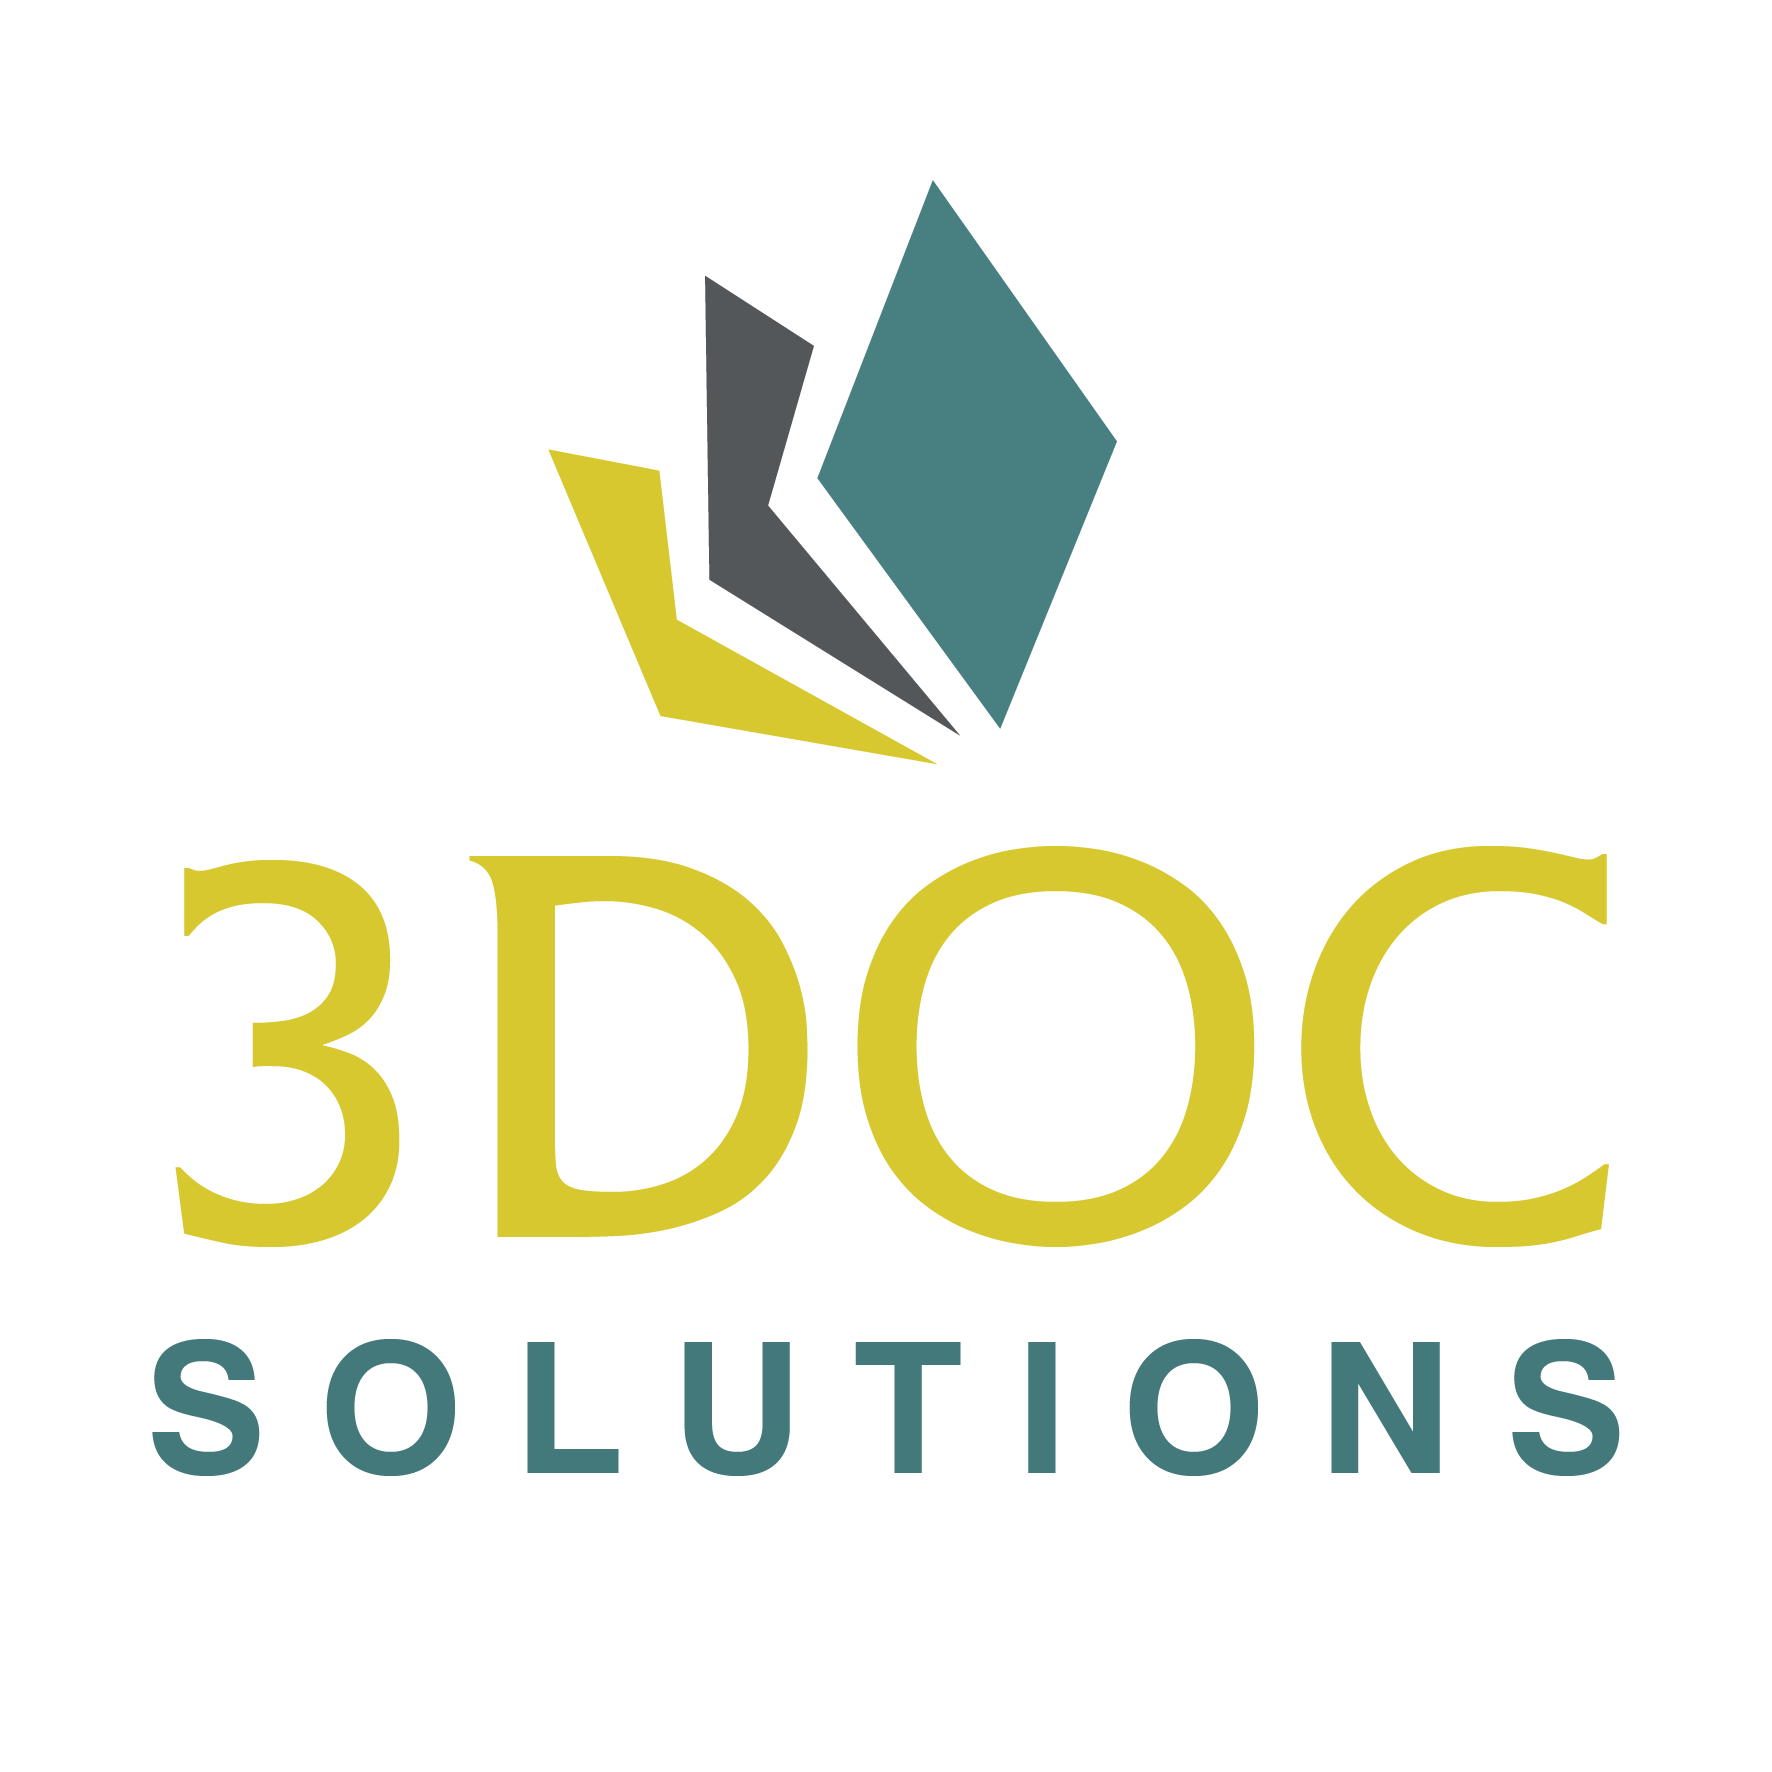 3 Doc Solutions - Branded Document Specialist | Giving you the professional edge